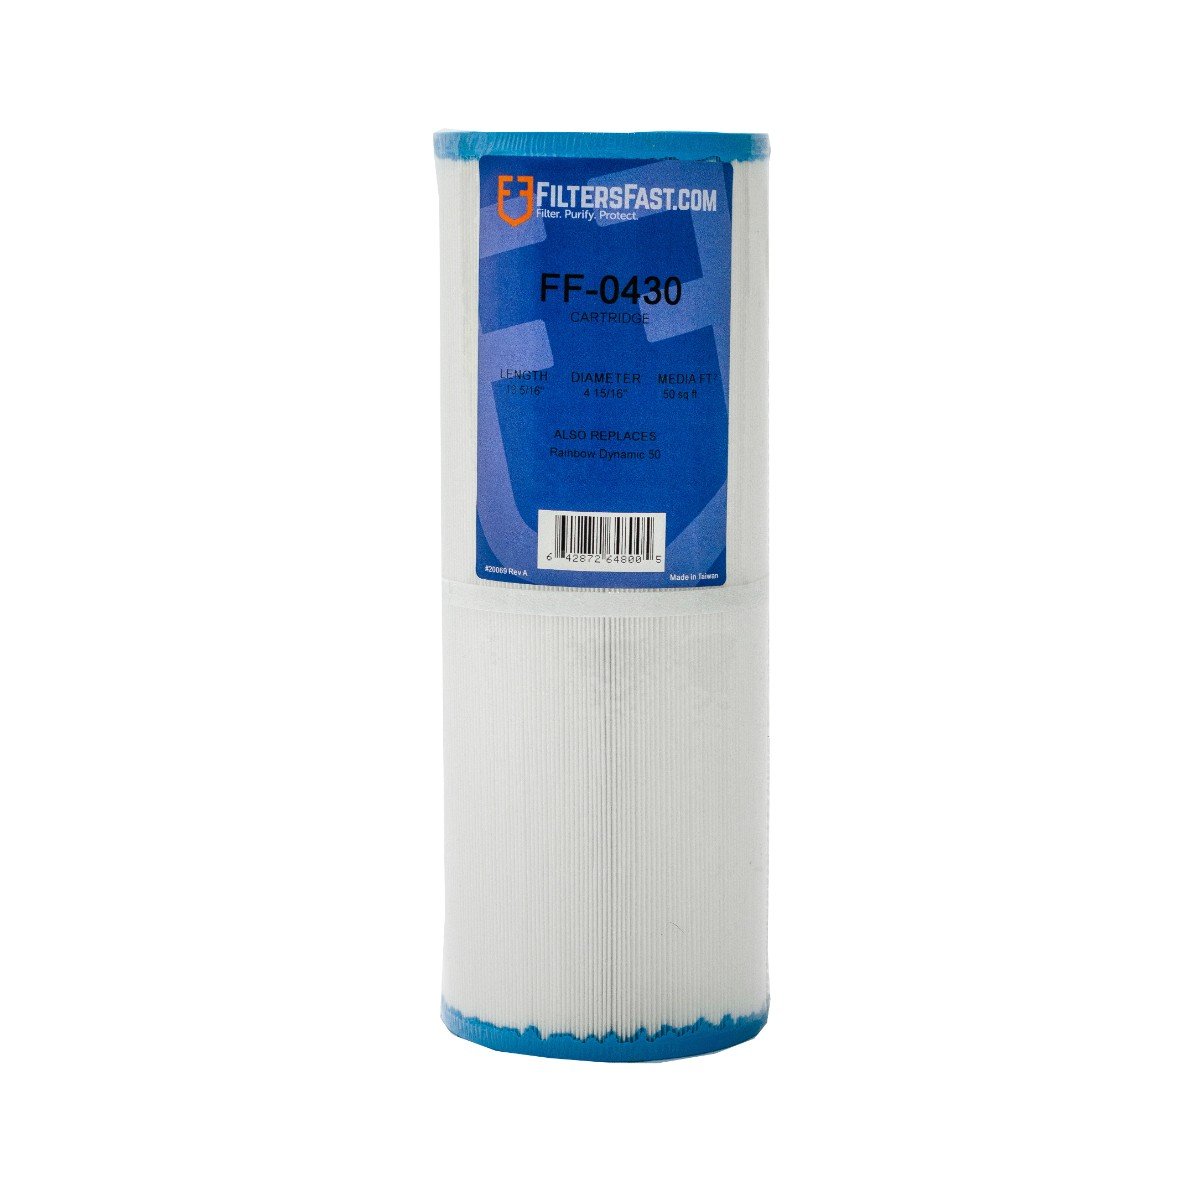 Filters Fast&reg; FF-0430 Replacement For Aquaform Spas 50